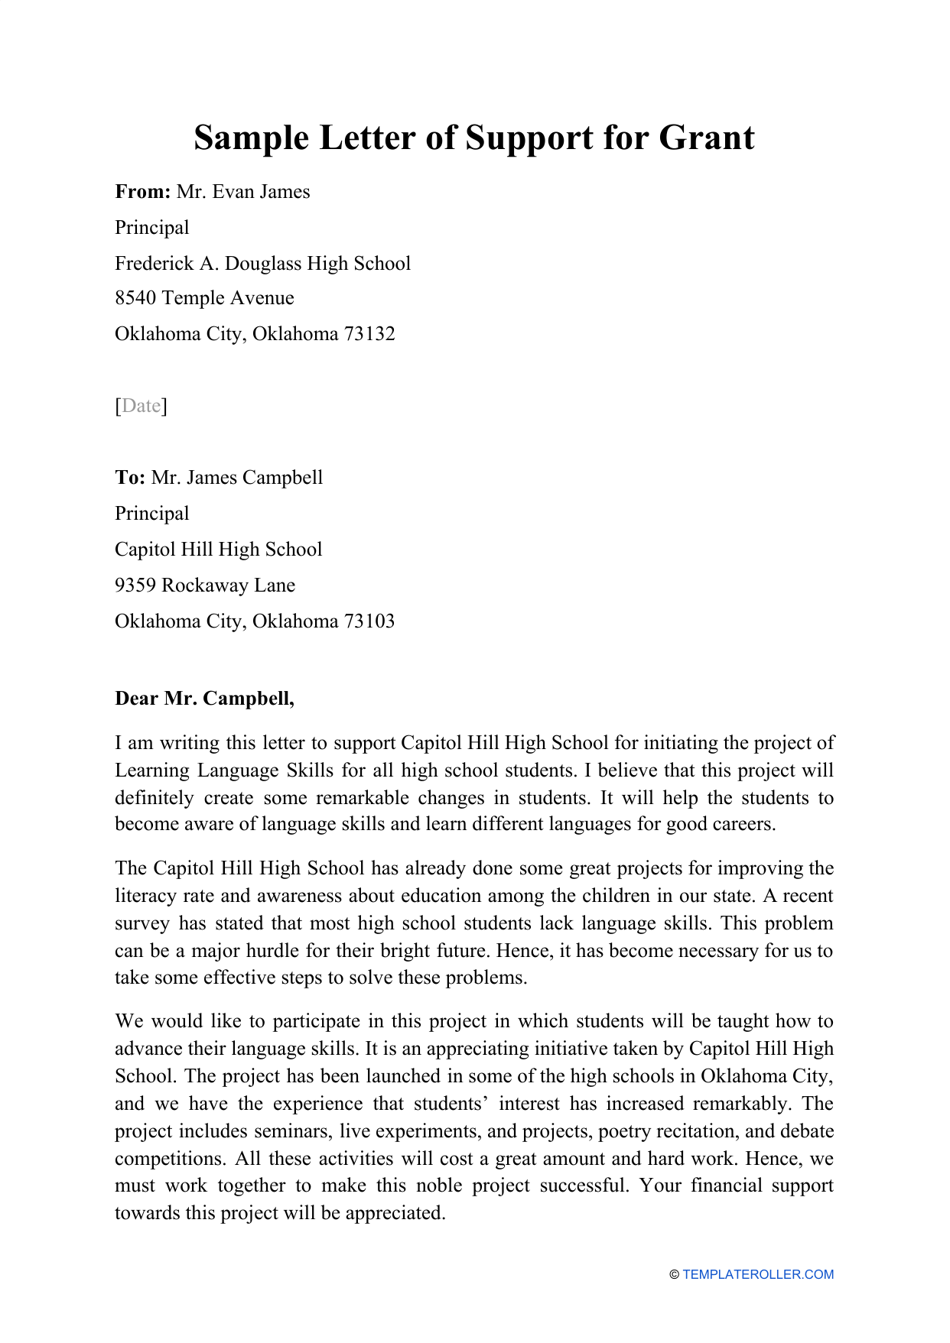 Sample Letter of Support for Grant - In title and Heading Format